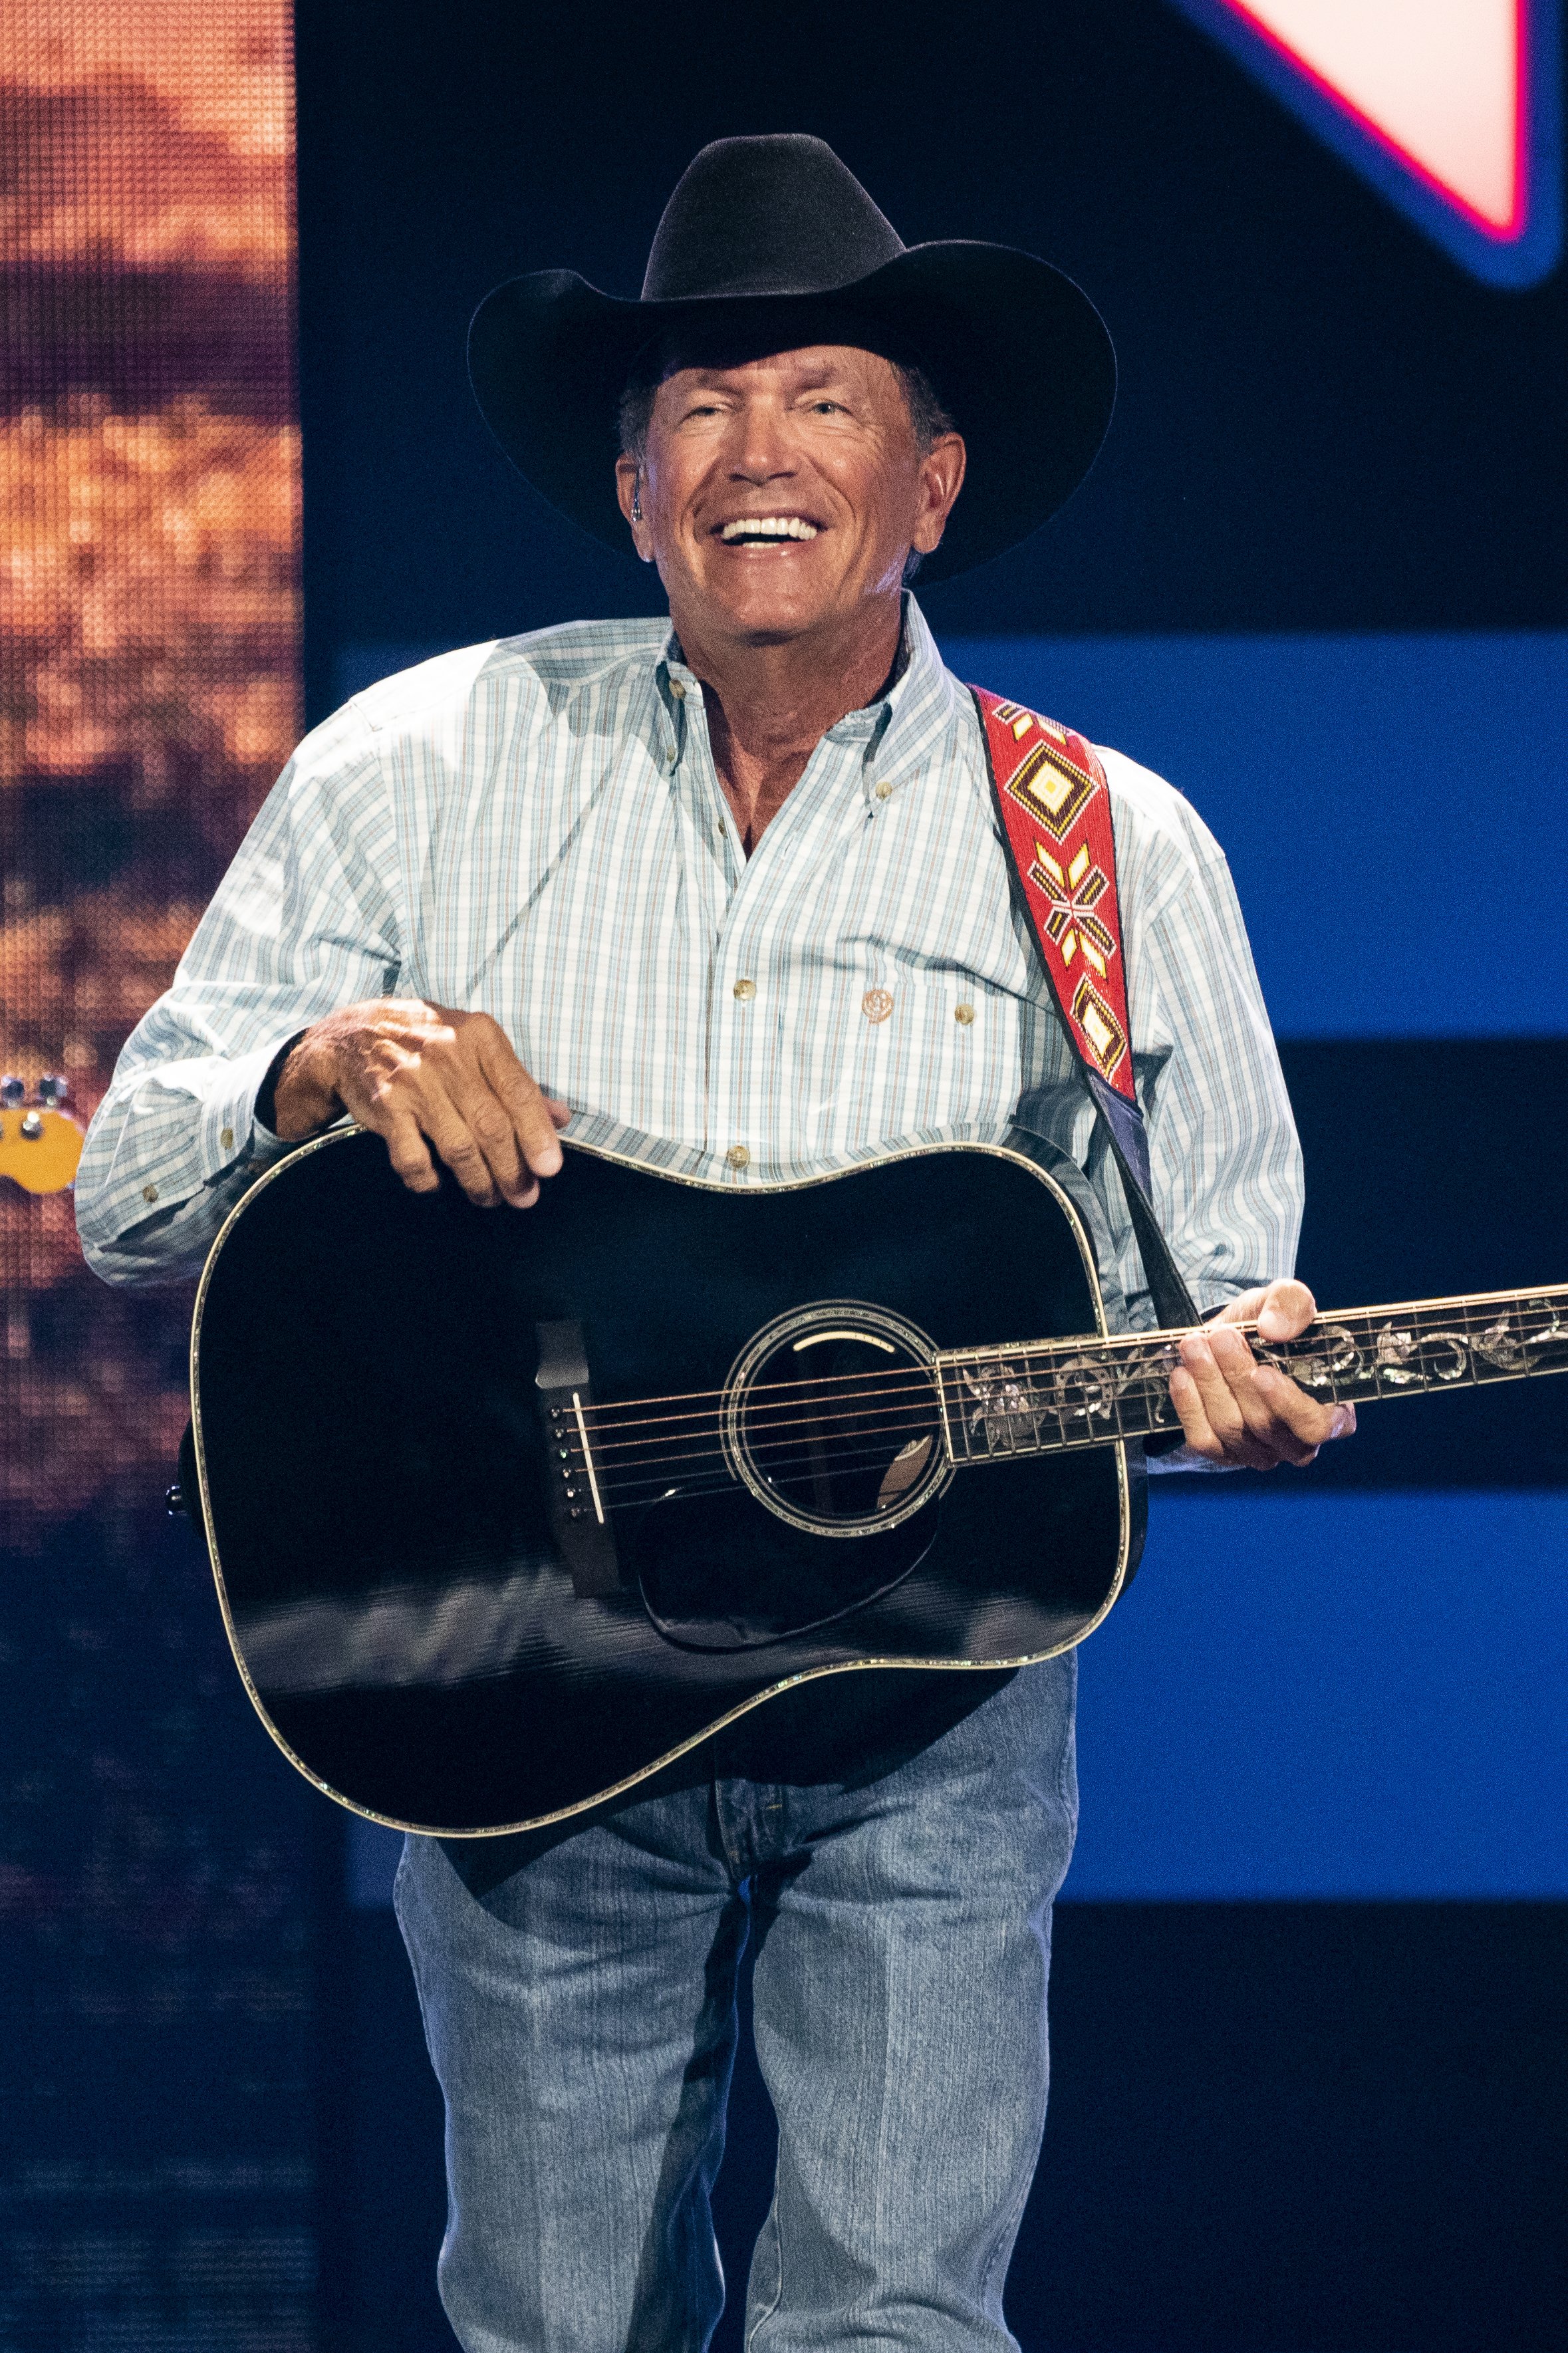 Country music legend George Strait at Frank Irwin Center on October 30, 2021 in Austin, Texas. | Source: Getty Images